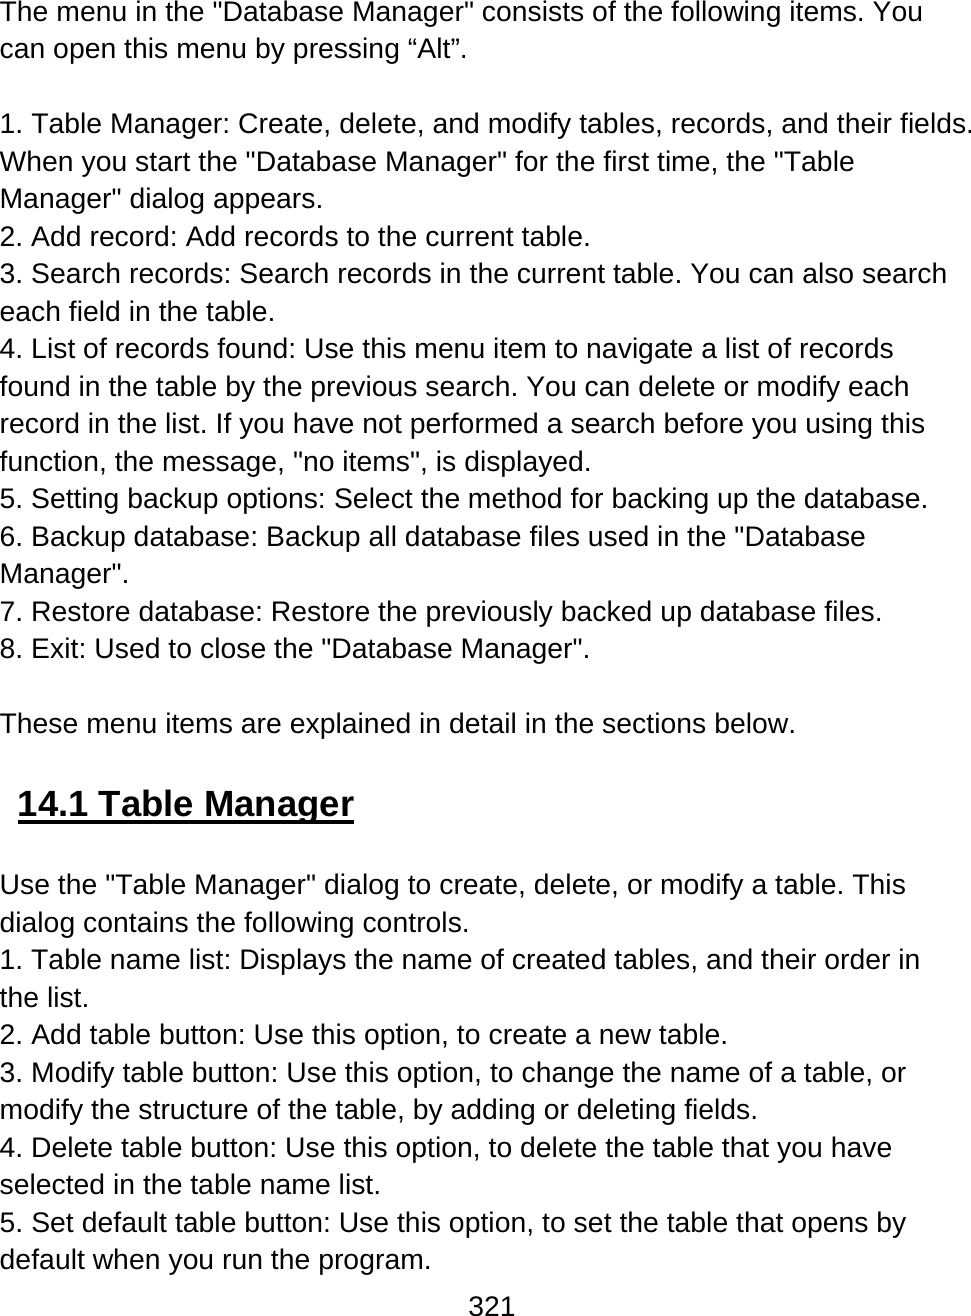 321  The menu in the &quot;Database Manager&quot; consists of the following items. You can open this menu by pressing “Alt”.  1. Table Manager: Create, delete, and modify tables, records, and their fields. When you start the &quot;Database Manager&quot; for the first time, the &quot;Table Manager&quot; dialog appears. 2. Add record: Add records to the current table. 3. Search records: Search records in the current table. You can also search each field in the table. 4. List of records found: Use this menu item to navigate a list of records found in the table by the previous search. You can delete or modify each record in the list. If you have not performed a search before you using this function, the message, &quot;no items&quot;, is displayed. 5. Setting backup options: Select the method for backing up the database. 6. Backup database: Backup all database files used in the &quot;Database Manager&quot;. 7. Restore database: Restore the previously backed up database files.  8. Exit: Used to close the &quot;Database Manager&quot;.  These menu items are explained in detail in the sections below.  14.1 Table Manager  Use the &quot;Table Manager&quot; dialog to create, delete, or modify a table. This dialog contains the following controls. 1. Table name list: Displays the name of created tables, and their order in the list. 2. Add table button: Use this option, to create a new table. 3. Modify table button: Use this option, to change the name of a table, or modify the structure of the table, by adding or deleting fields. 4. Delete table button: Use this option, to delete the table that you have selected in the table name list. 5. Set default table button: Use this option, to set the table that opens by default when you run the program. 